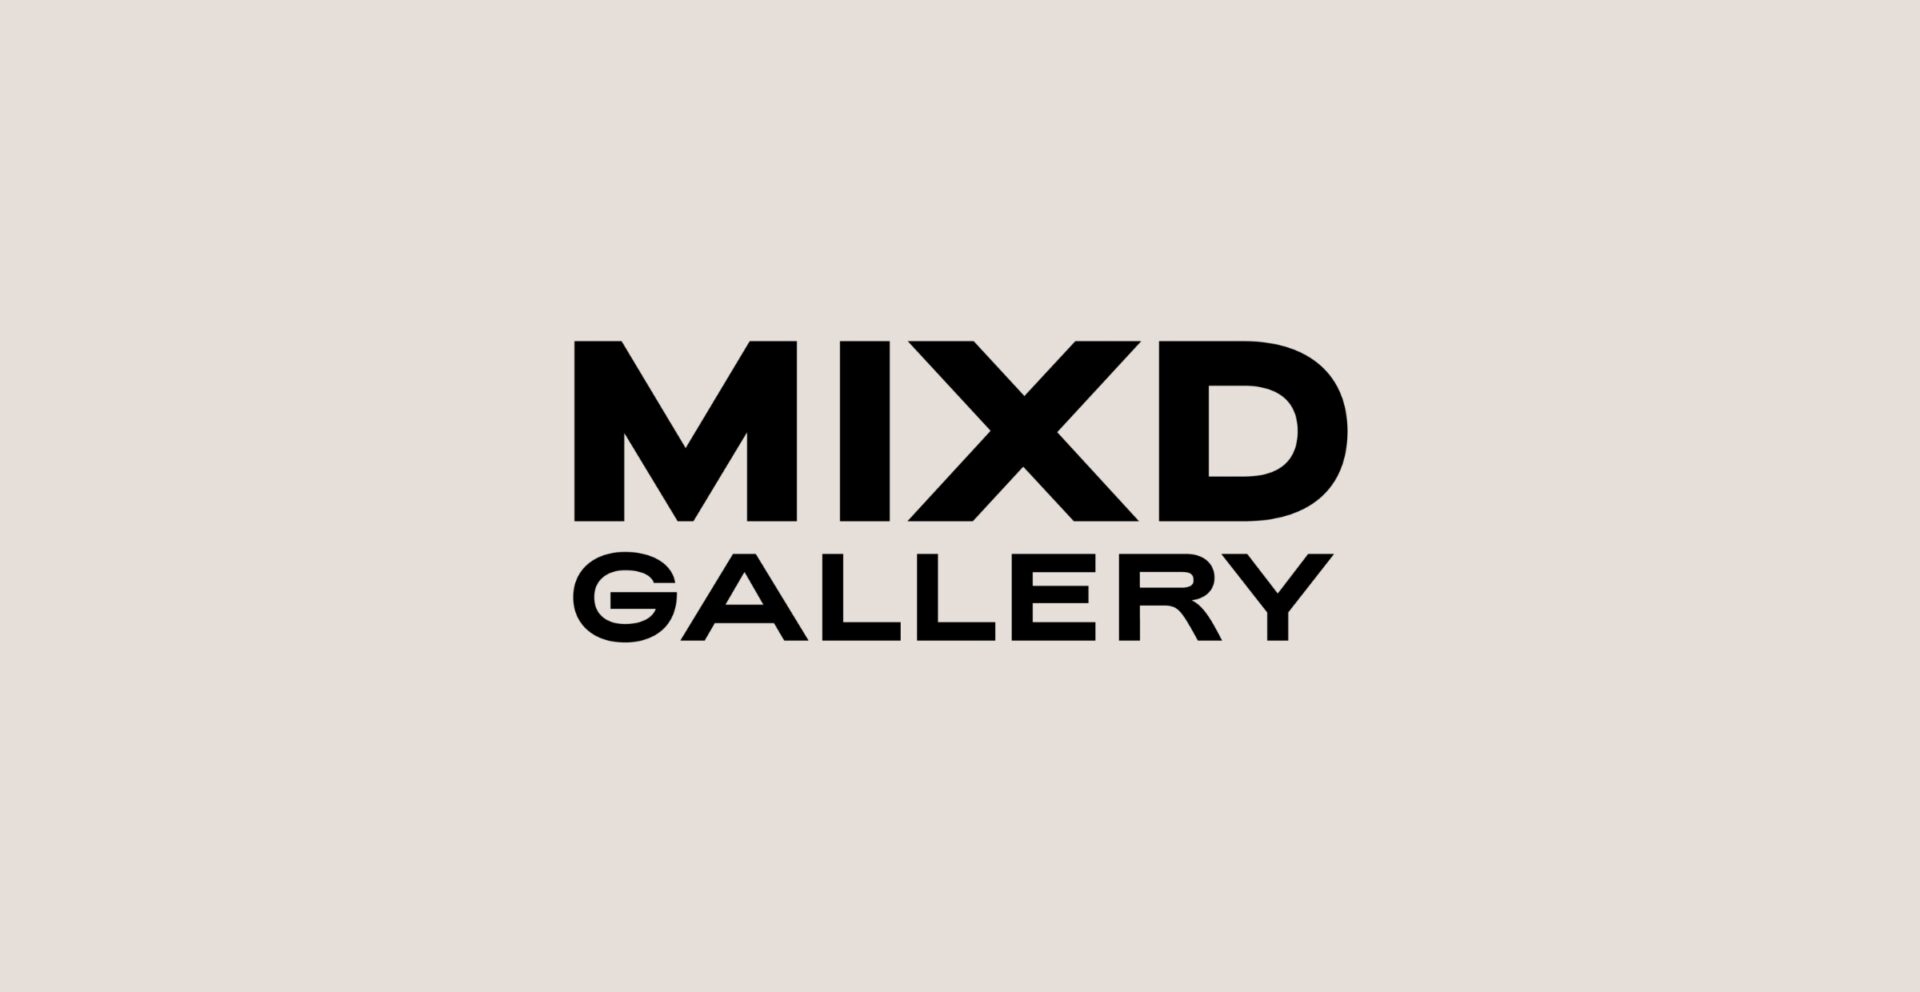 Mixd gallery